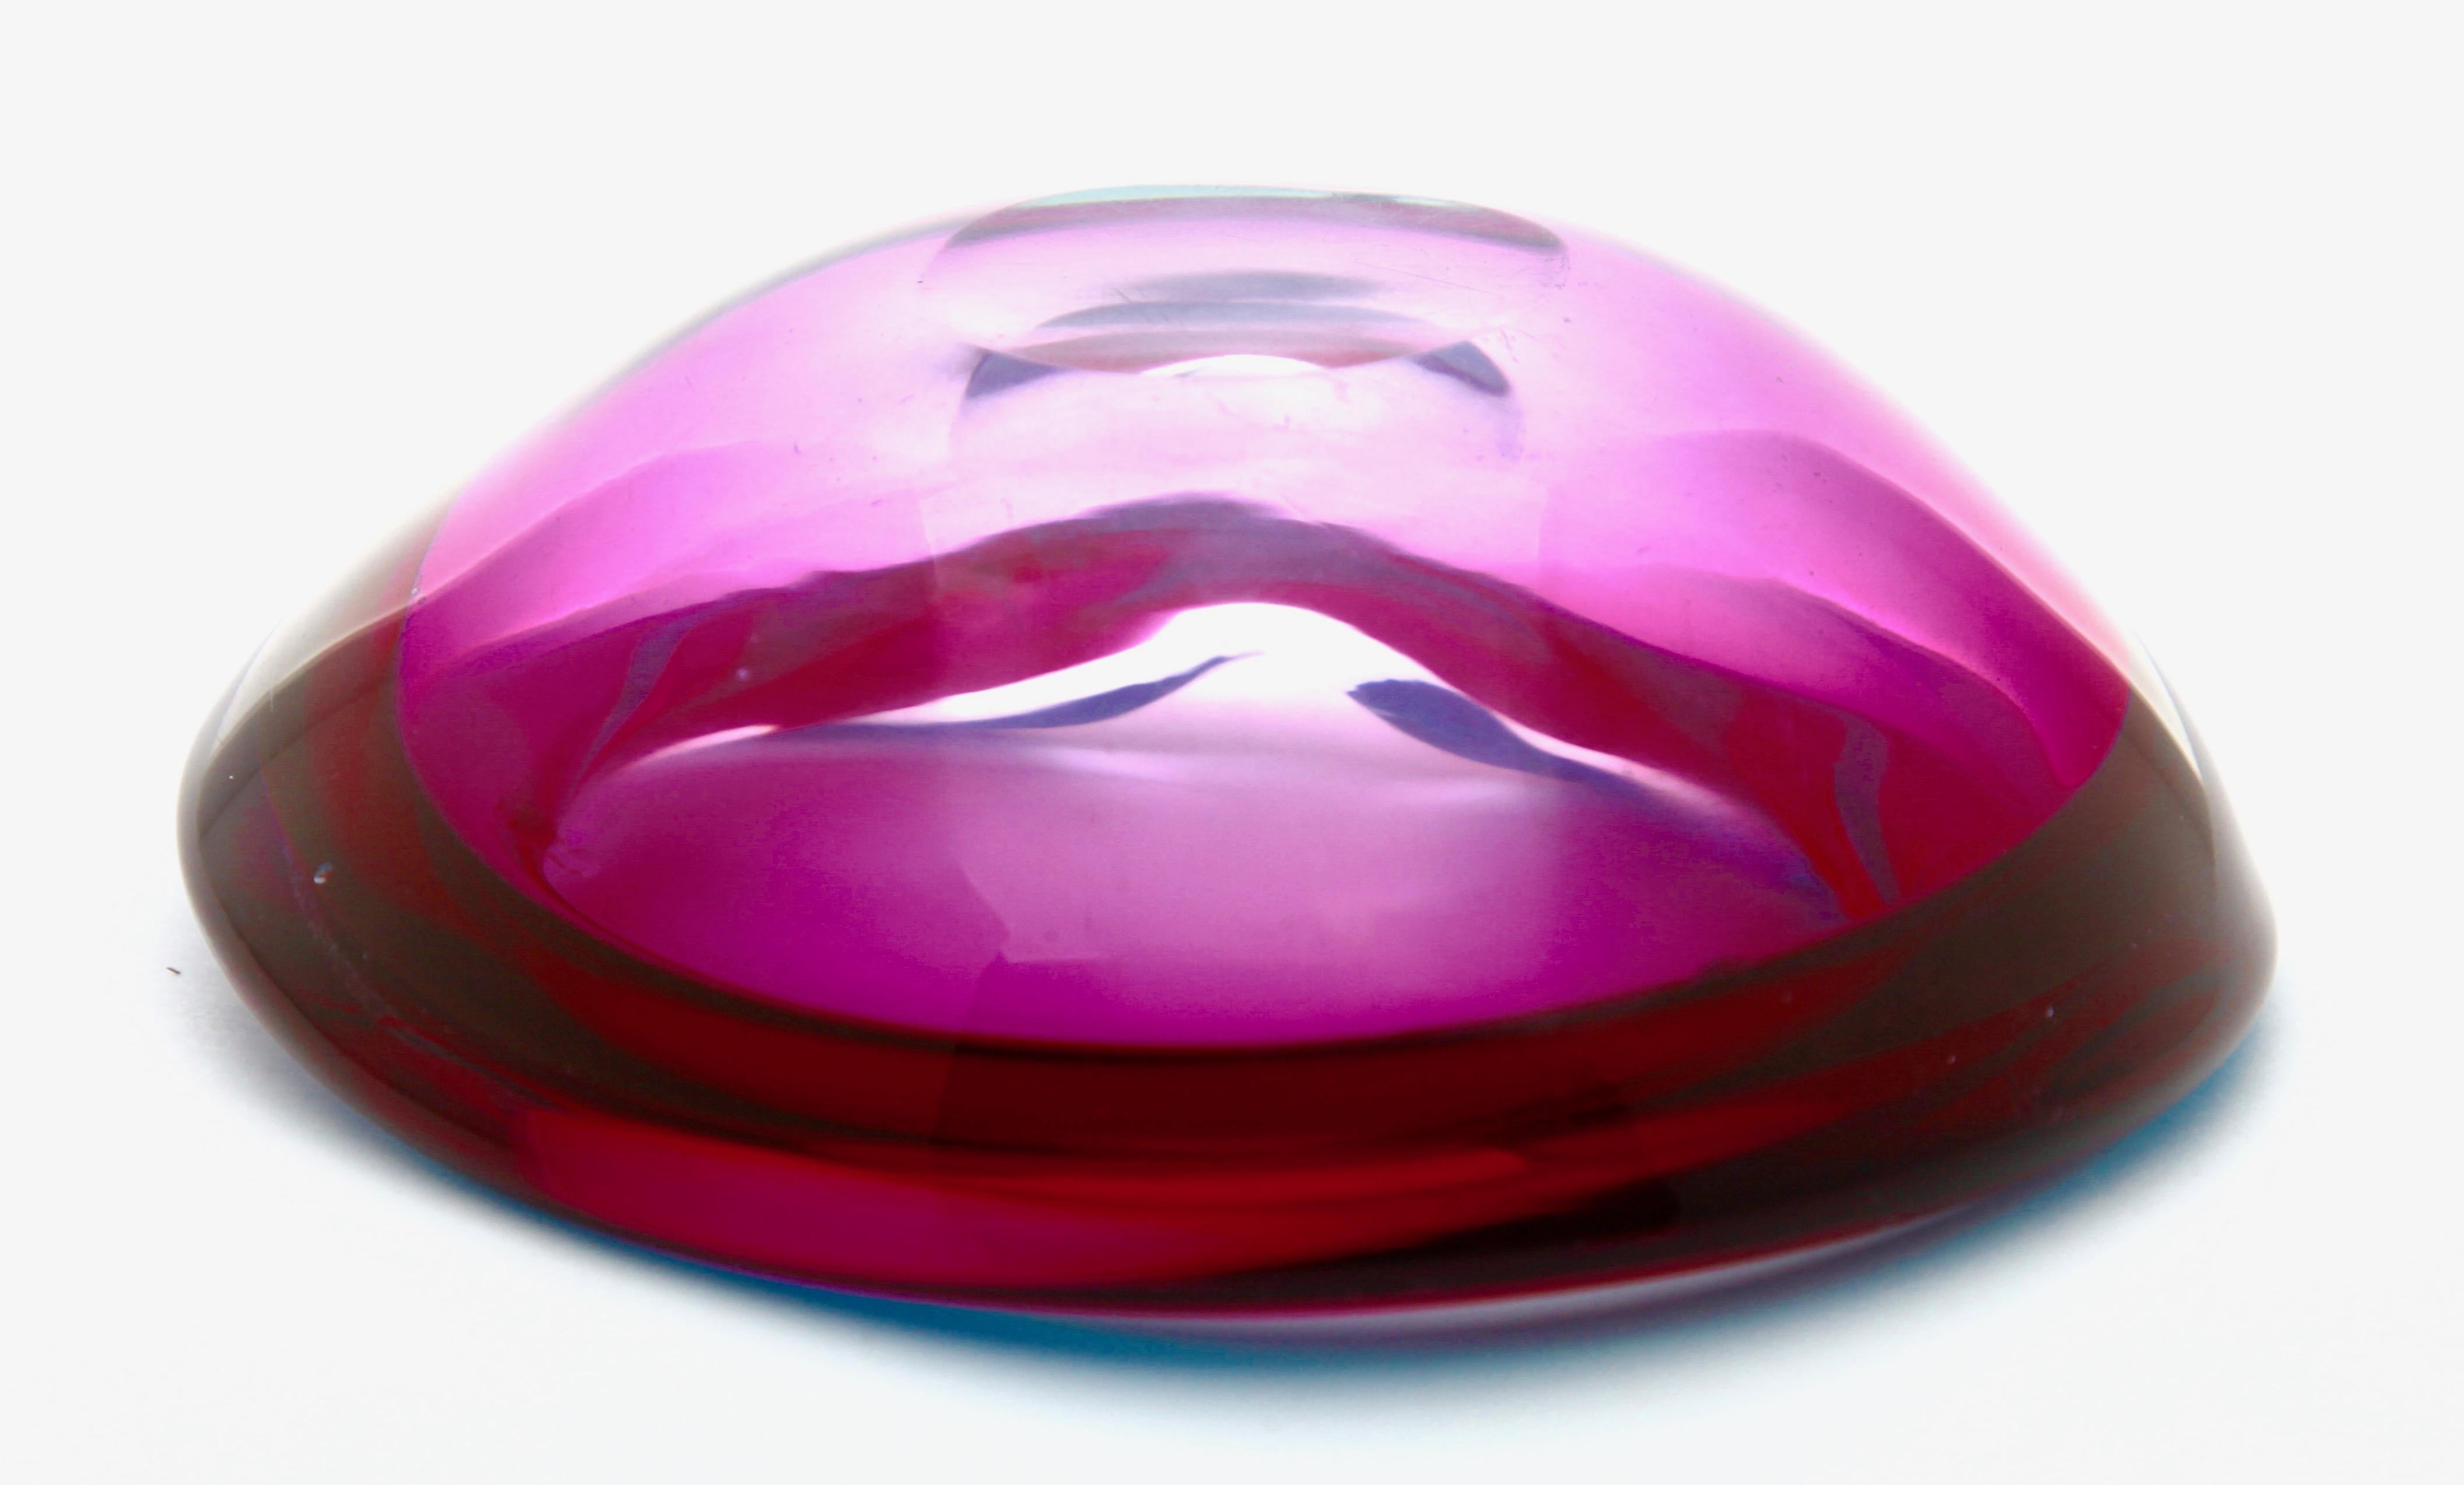 Mid-20th Century Murano Glass Bowl with Four Lobes, Attributed to Flavio Poli for Seguso